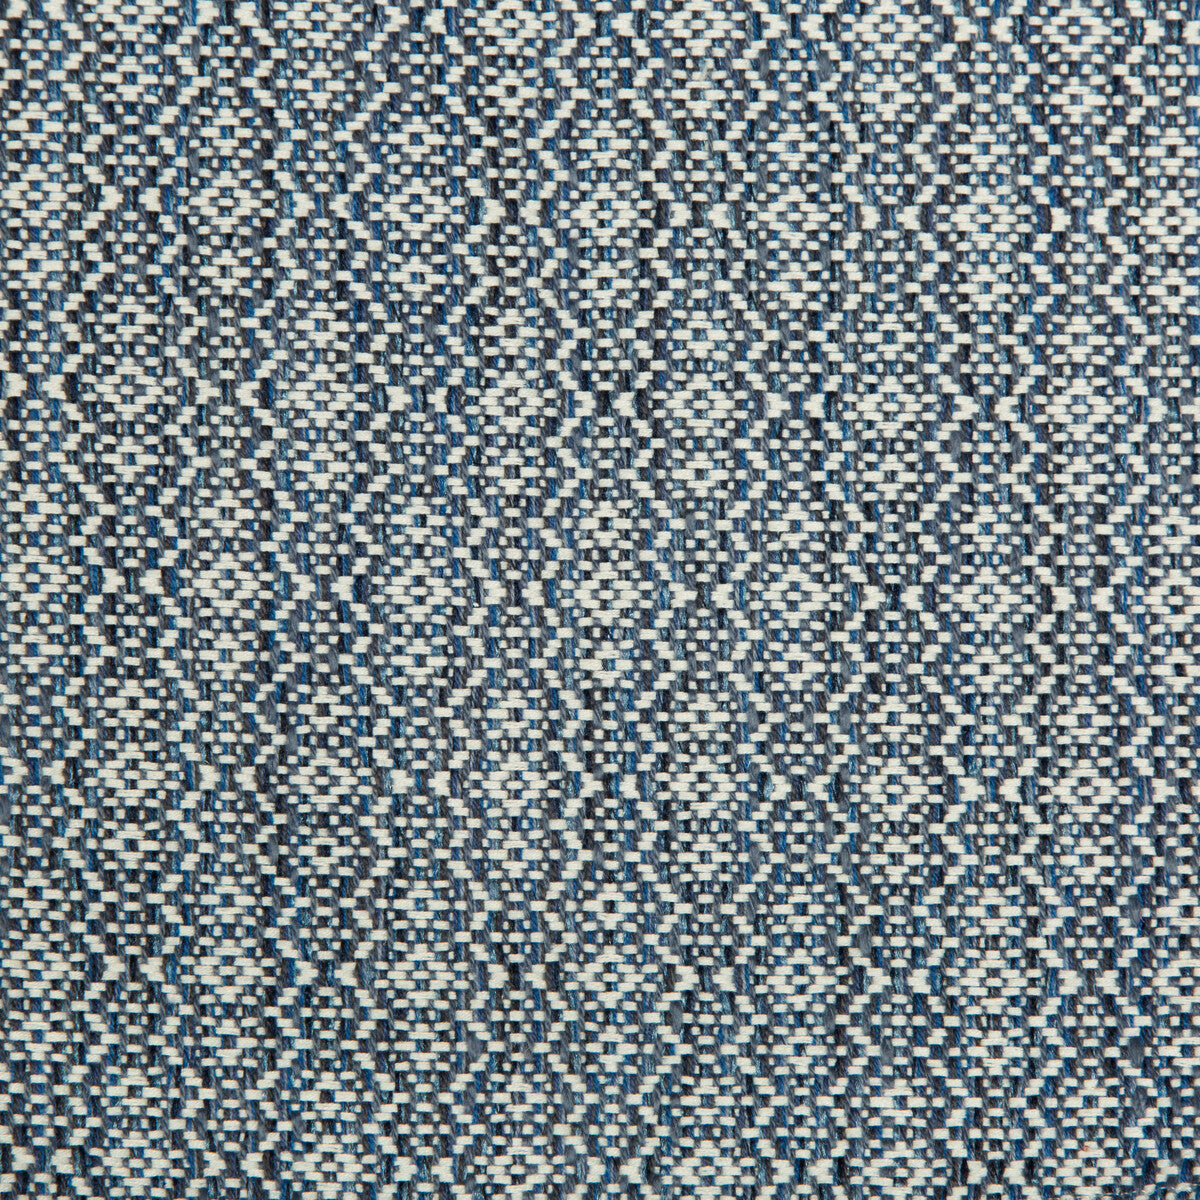 Kravet Contract fabric in 34630-515 color - pattern 34630.515.0 - by Kravet Contract in the Crypton Incase collection